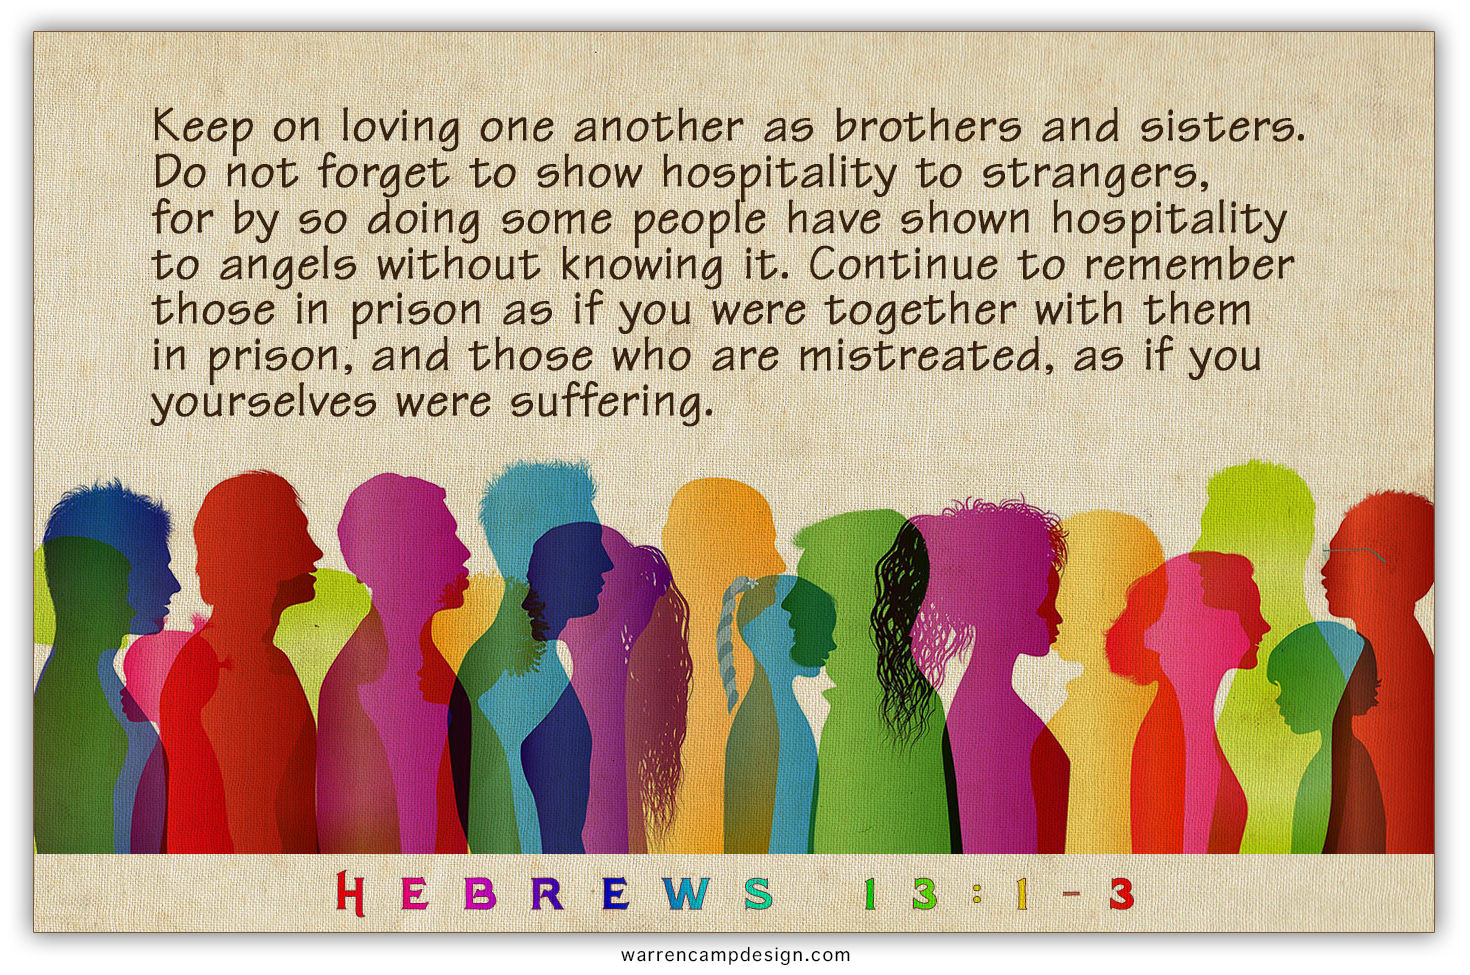 Scripture picture of Hebrews 13:1-3, emphasizing the importance of our showing hospitality to strangers